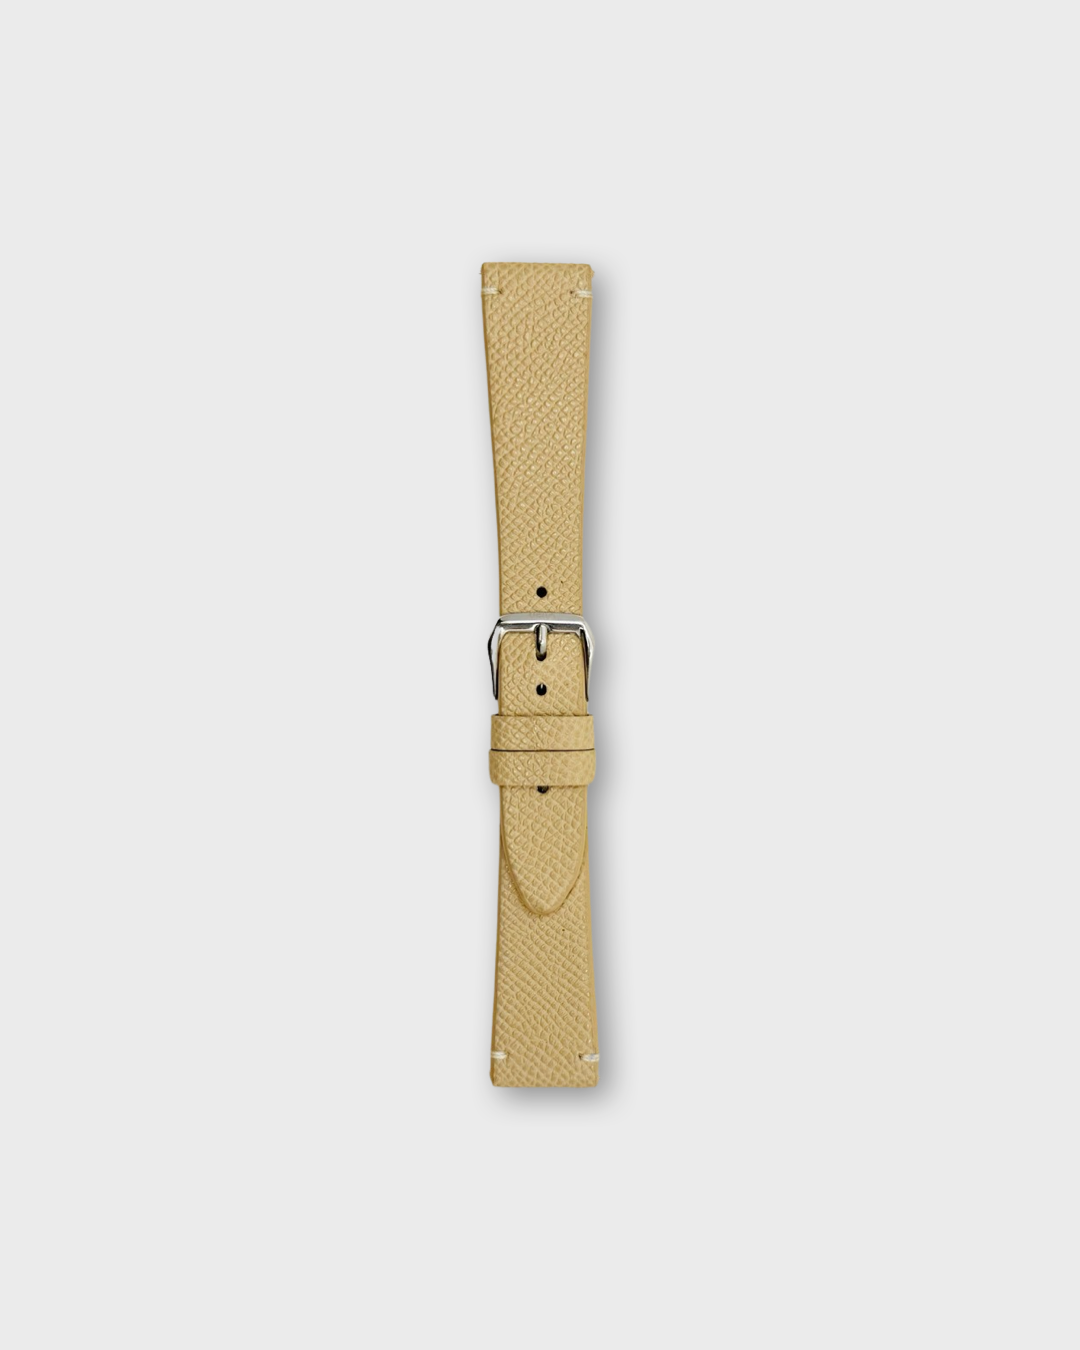 INTRO STRAP - FOR QUARTZ, MECHANICAL & SMART WATCHES [Duo Stitch in Italian Epsom Leather] HEllO